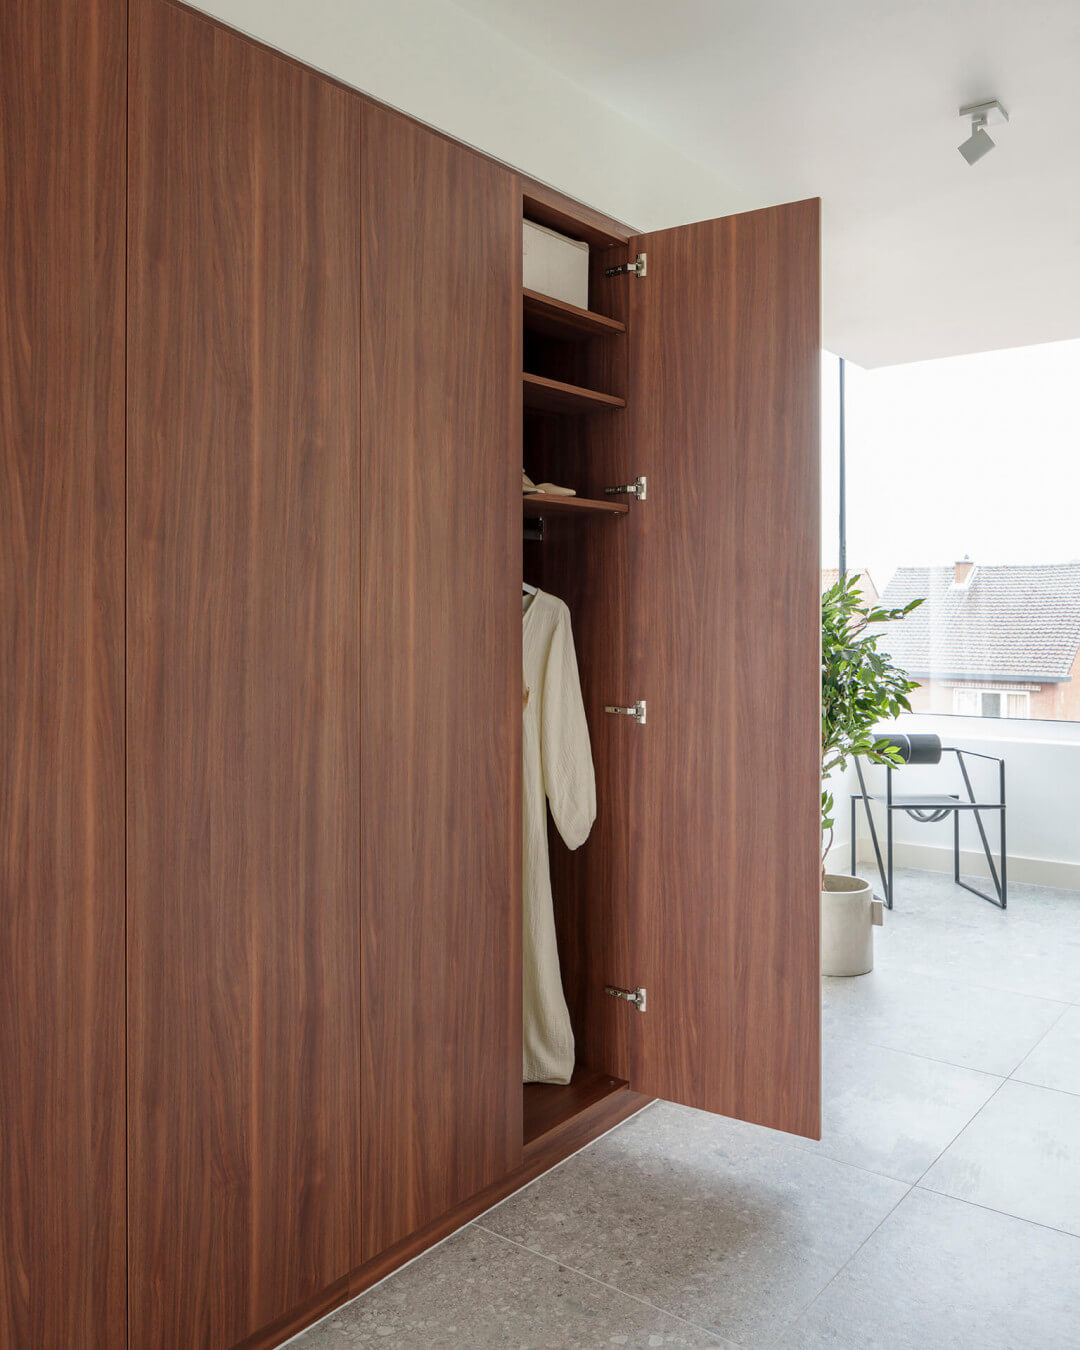 Wardrobe doors fitted with high-quality Blum hinges.